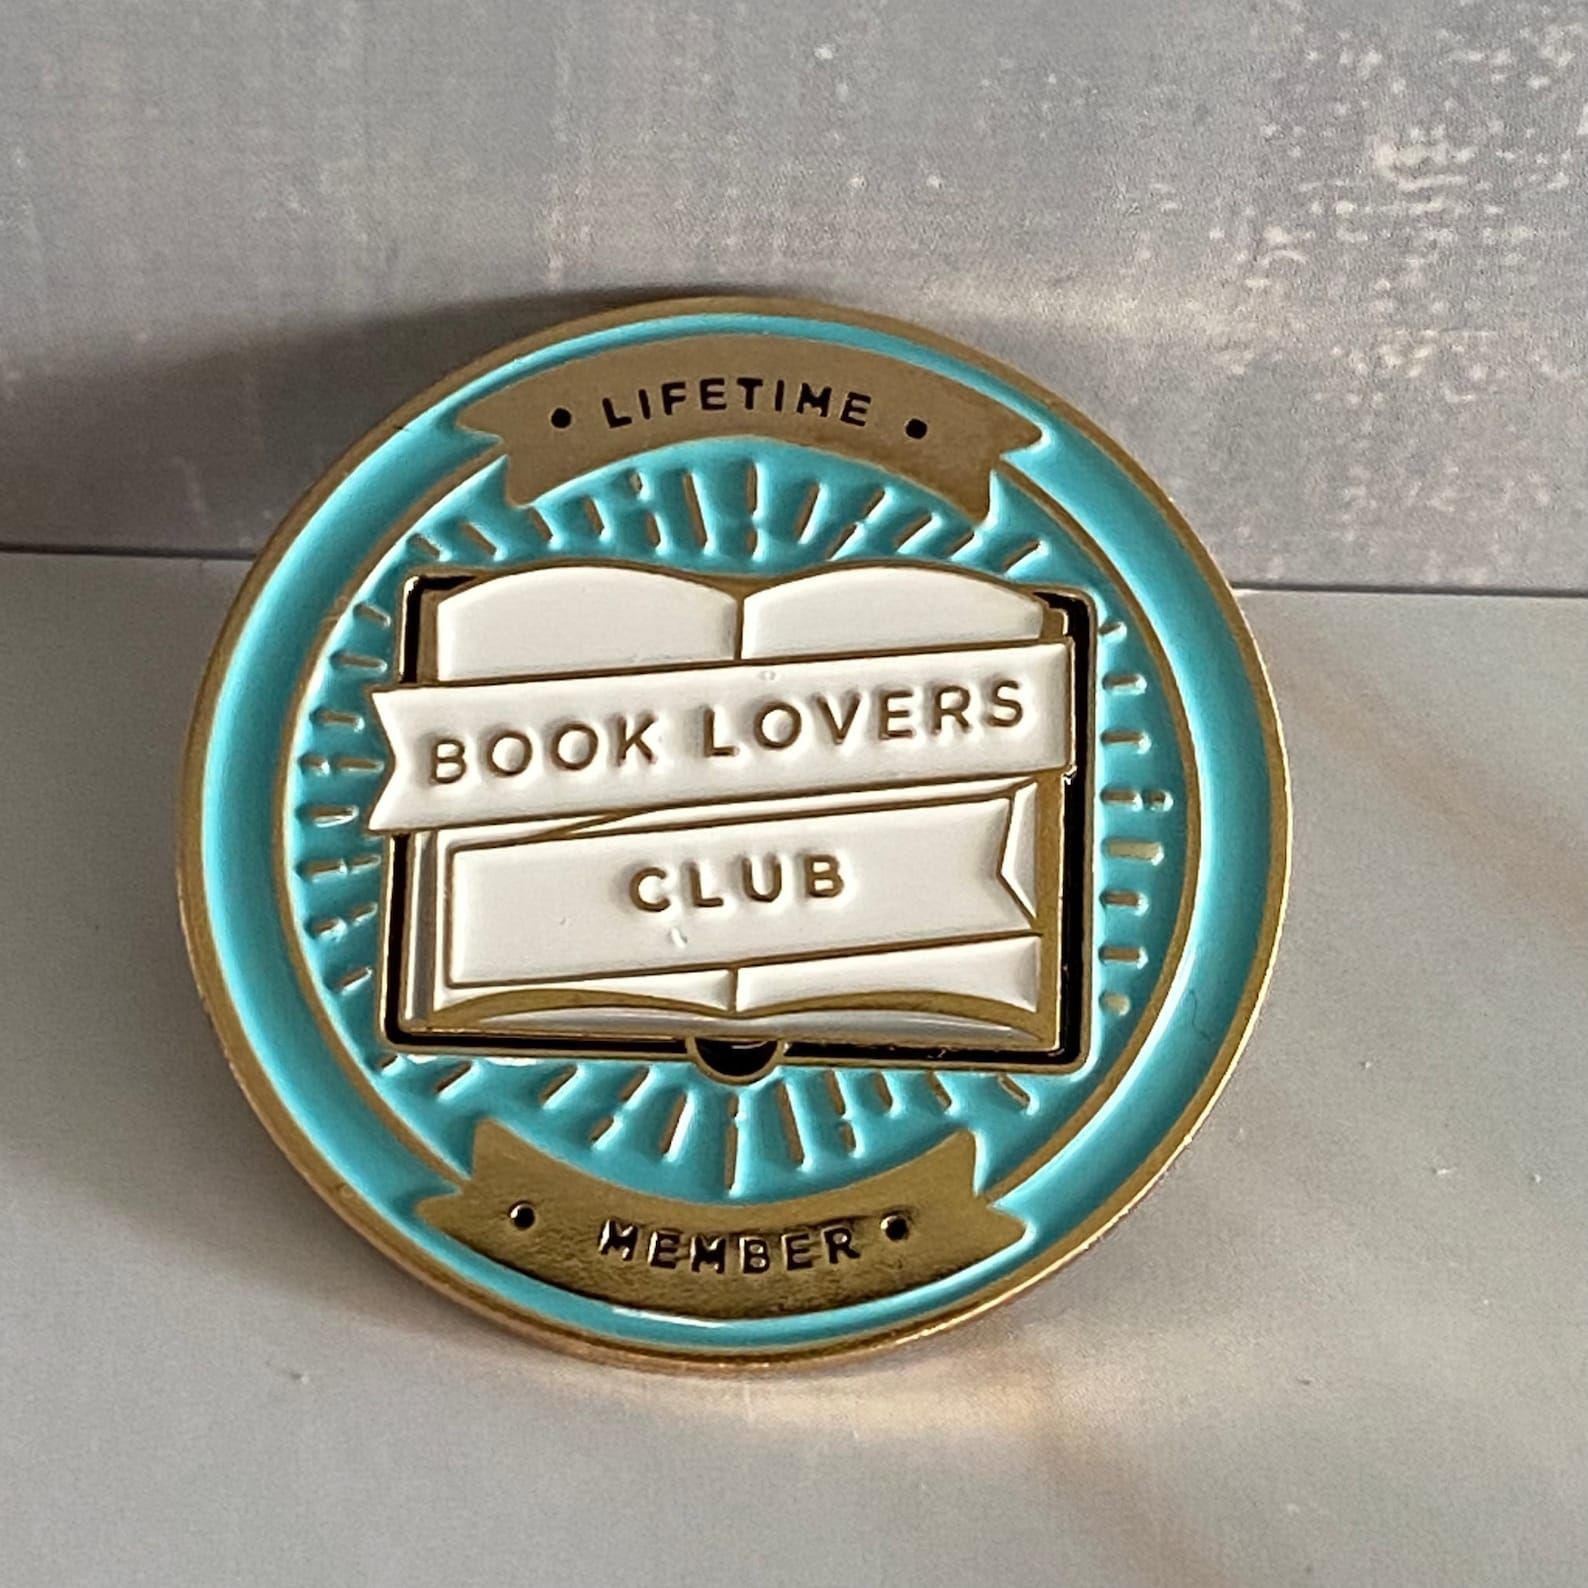 blue and gold pin that reads Book Lovers Club on an open book, and "lifetime membership" on the perimeter of the pin.